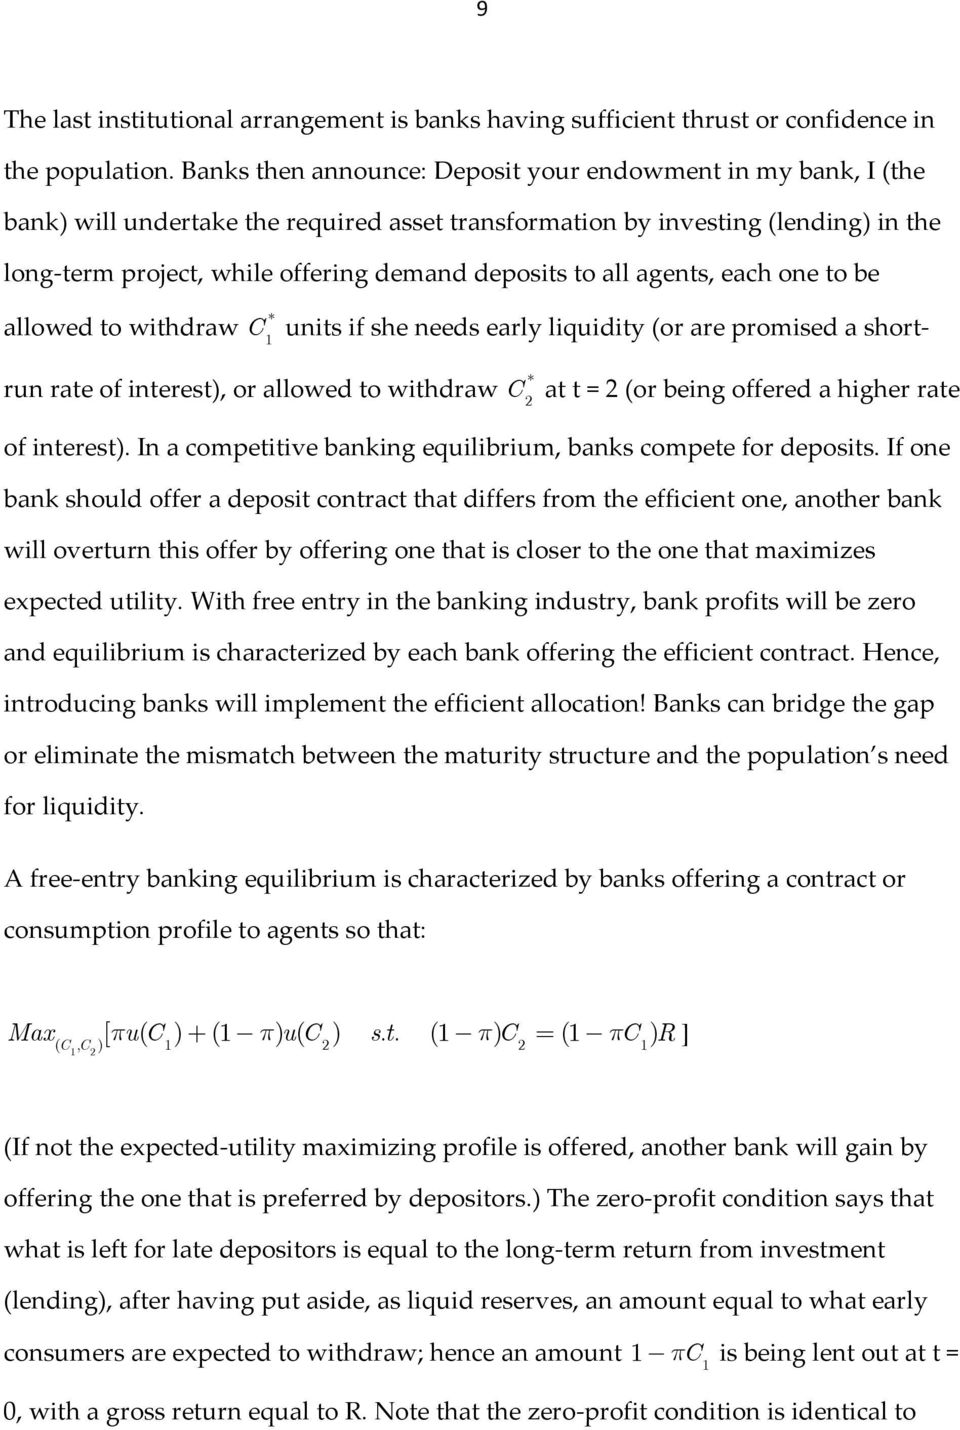 all agents, each one to be allowed to withdraw units if she needs early liquidity (or are romised a short run rate of interest), or allowed to withdraw at t = (or being offered a higher rate of